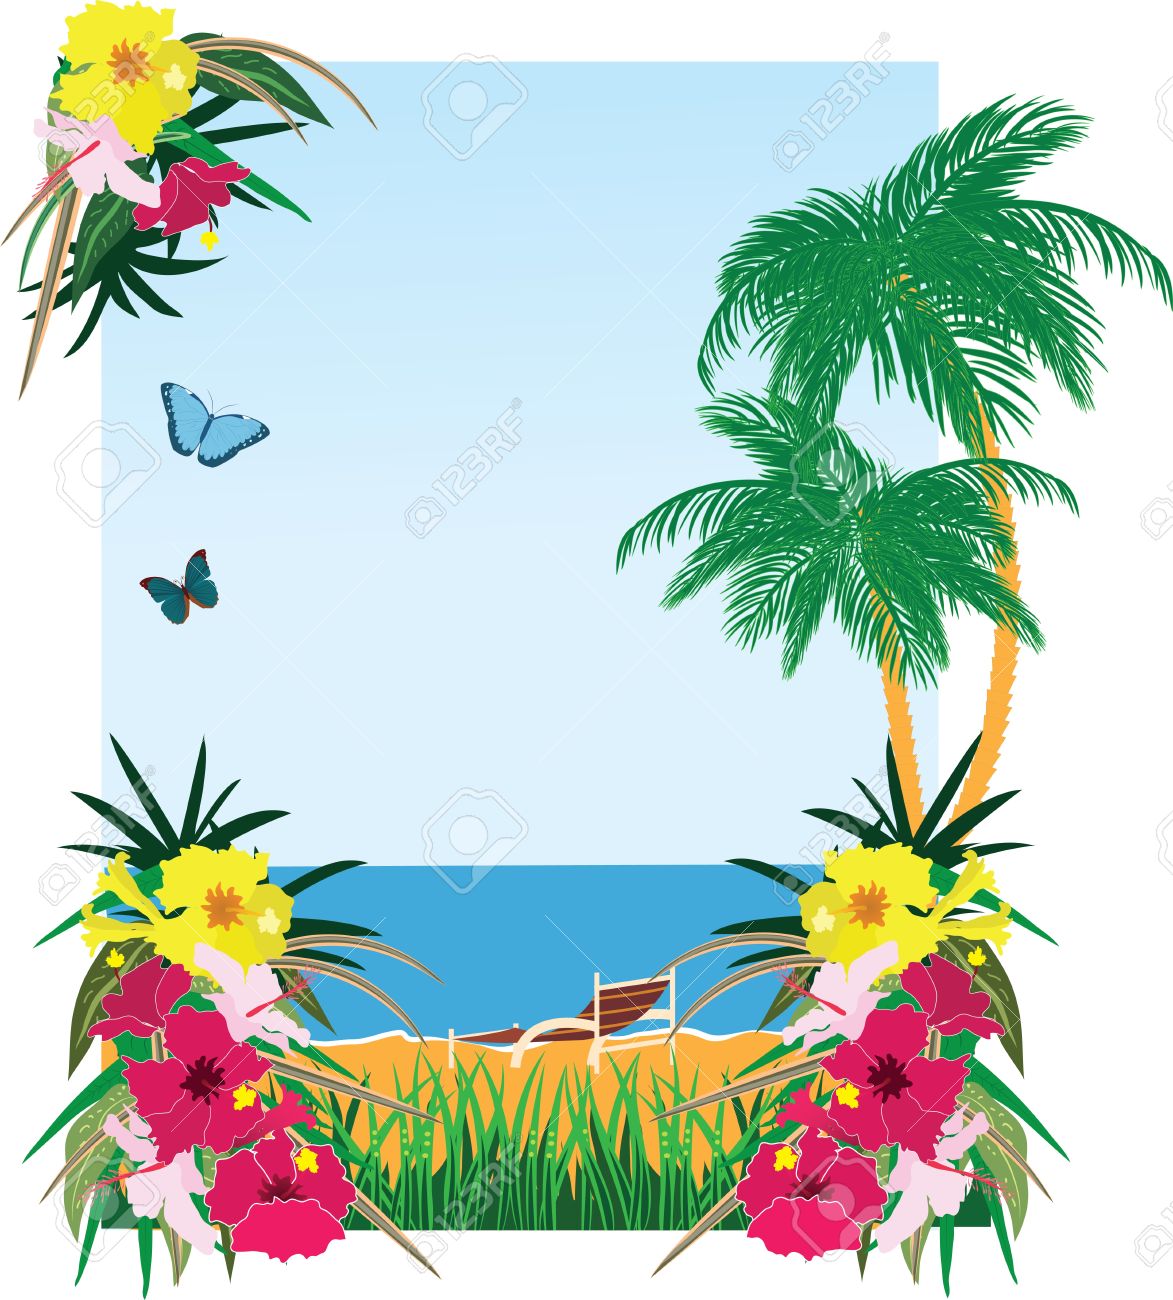 Beach Clipart Backgrounds | Free download on ClipArtMag